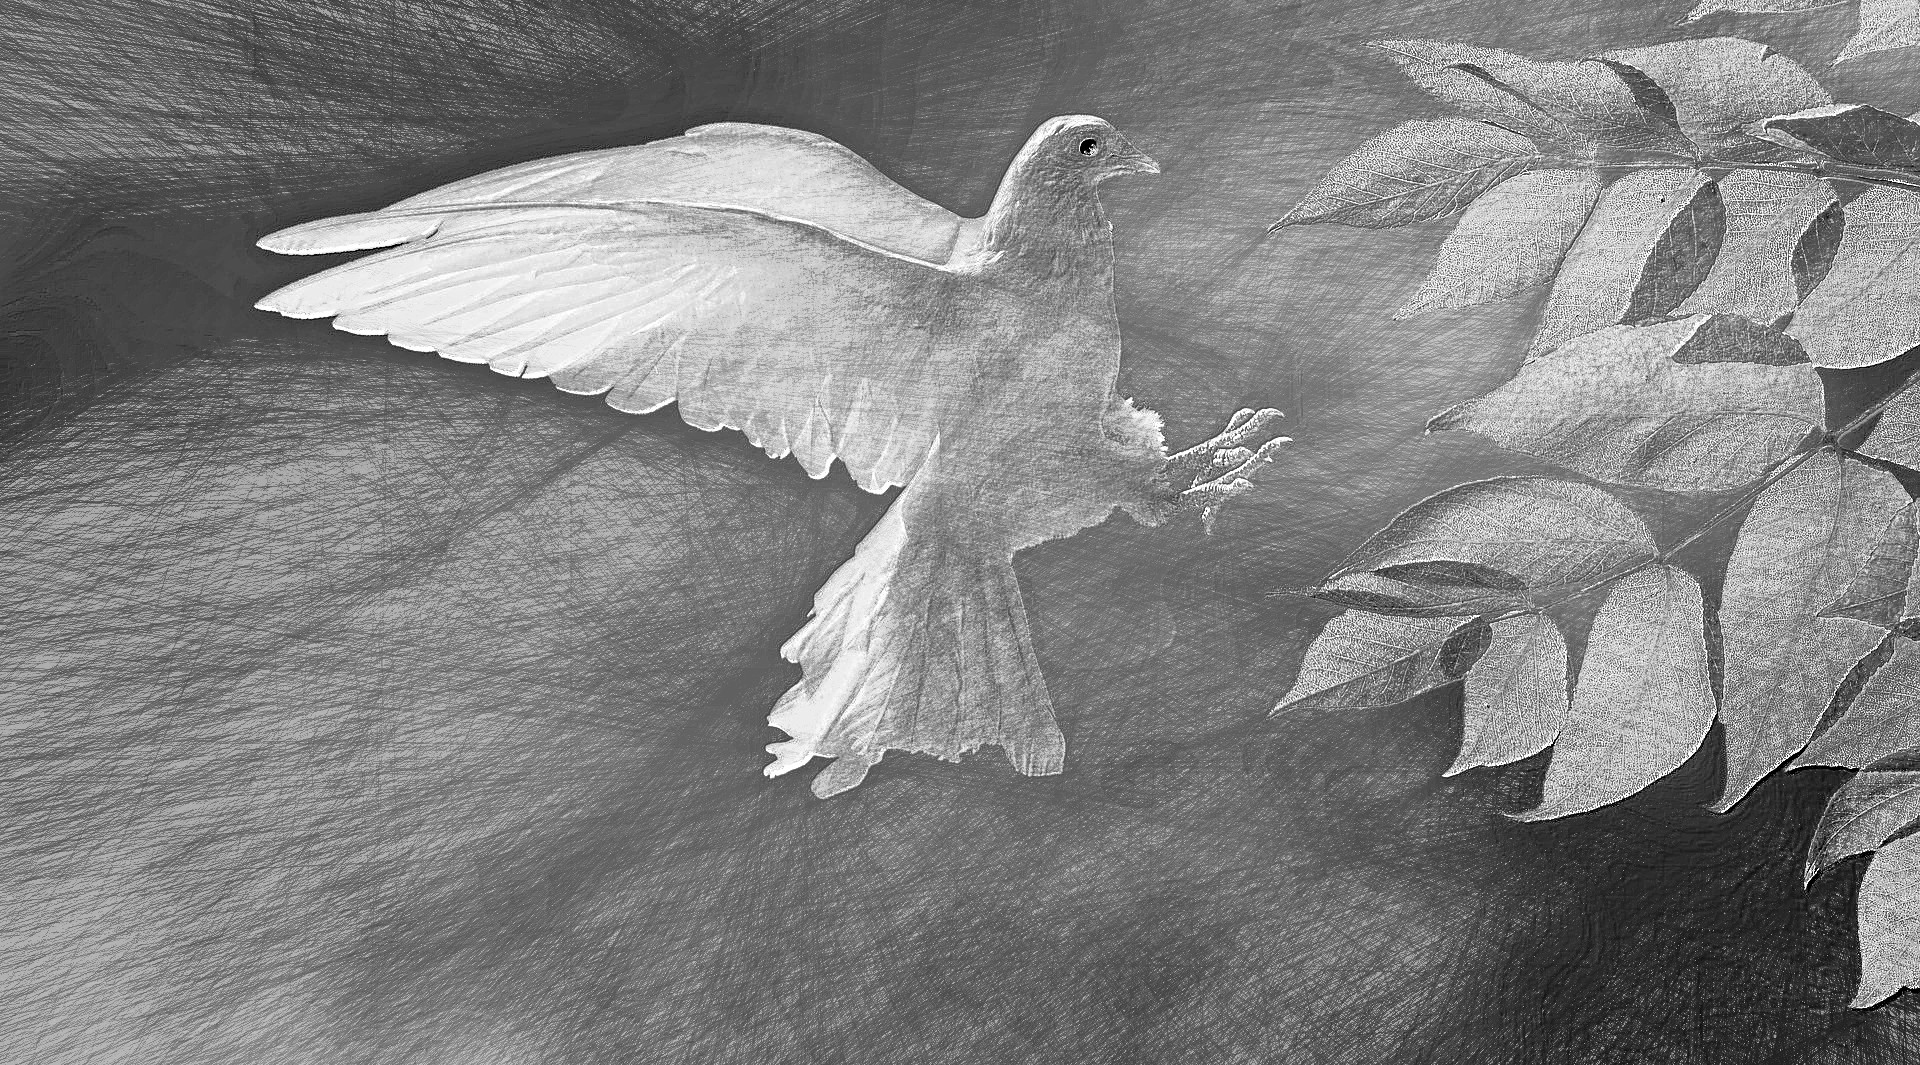 2020-08-22 12-09-13dove-2516641_1920 with a draw on black effect, using option B&W and pencil lead=HB.jpg